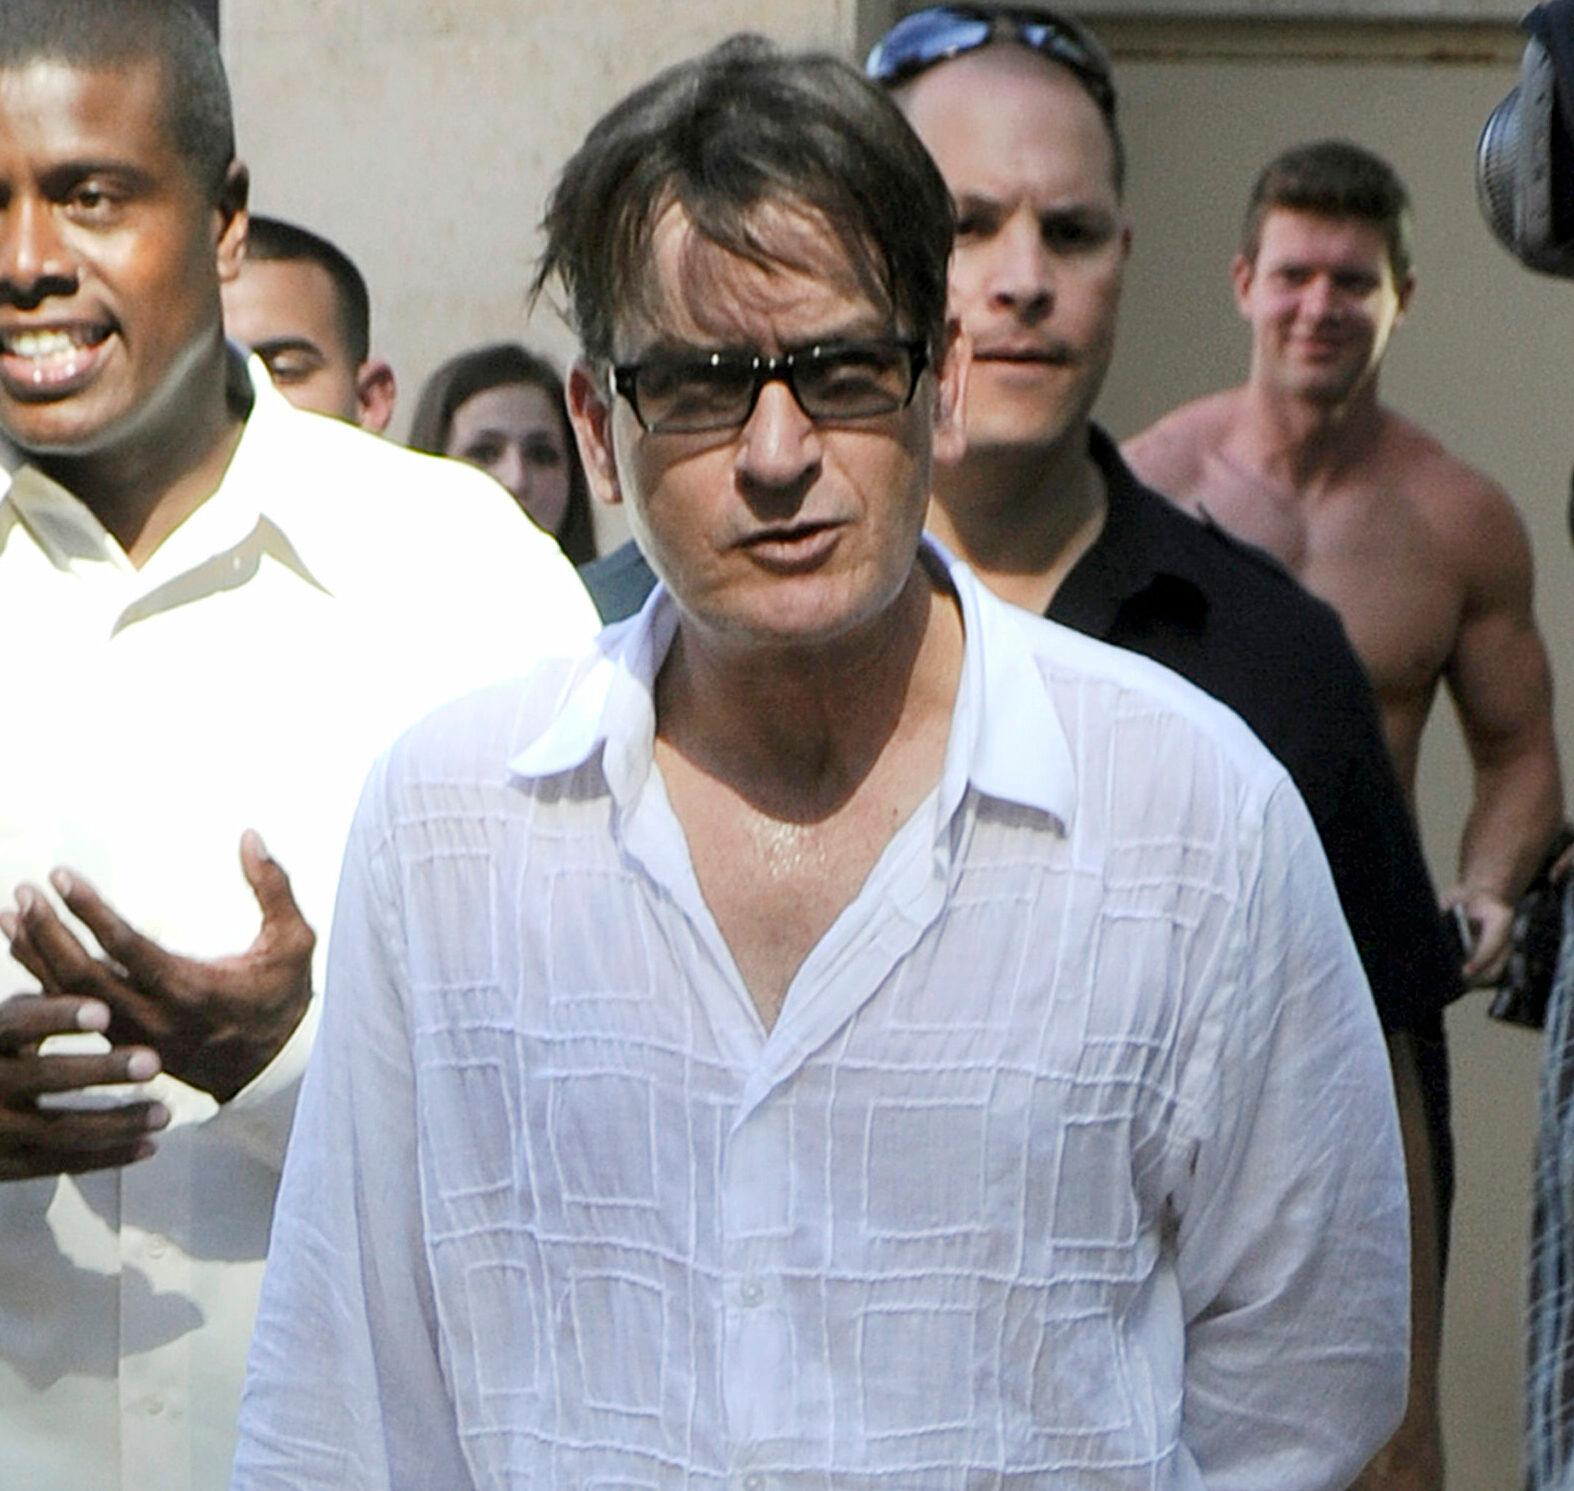 Actor Charlie Sheen is seen giving an interview with Billy Bush during NATPE 2012 in Miami Beach